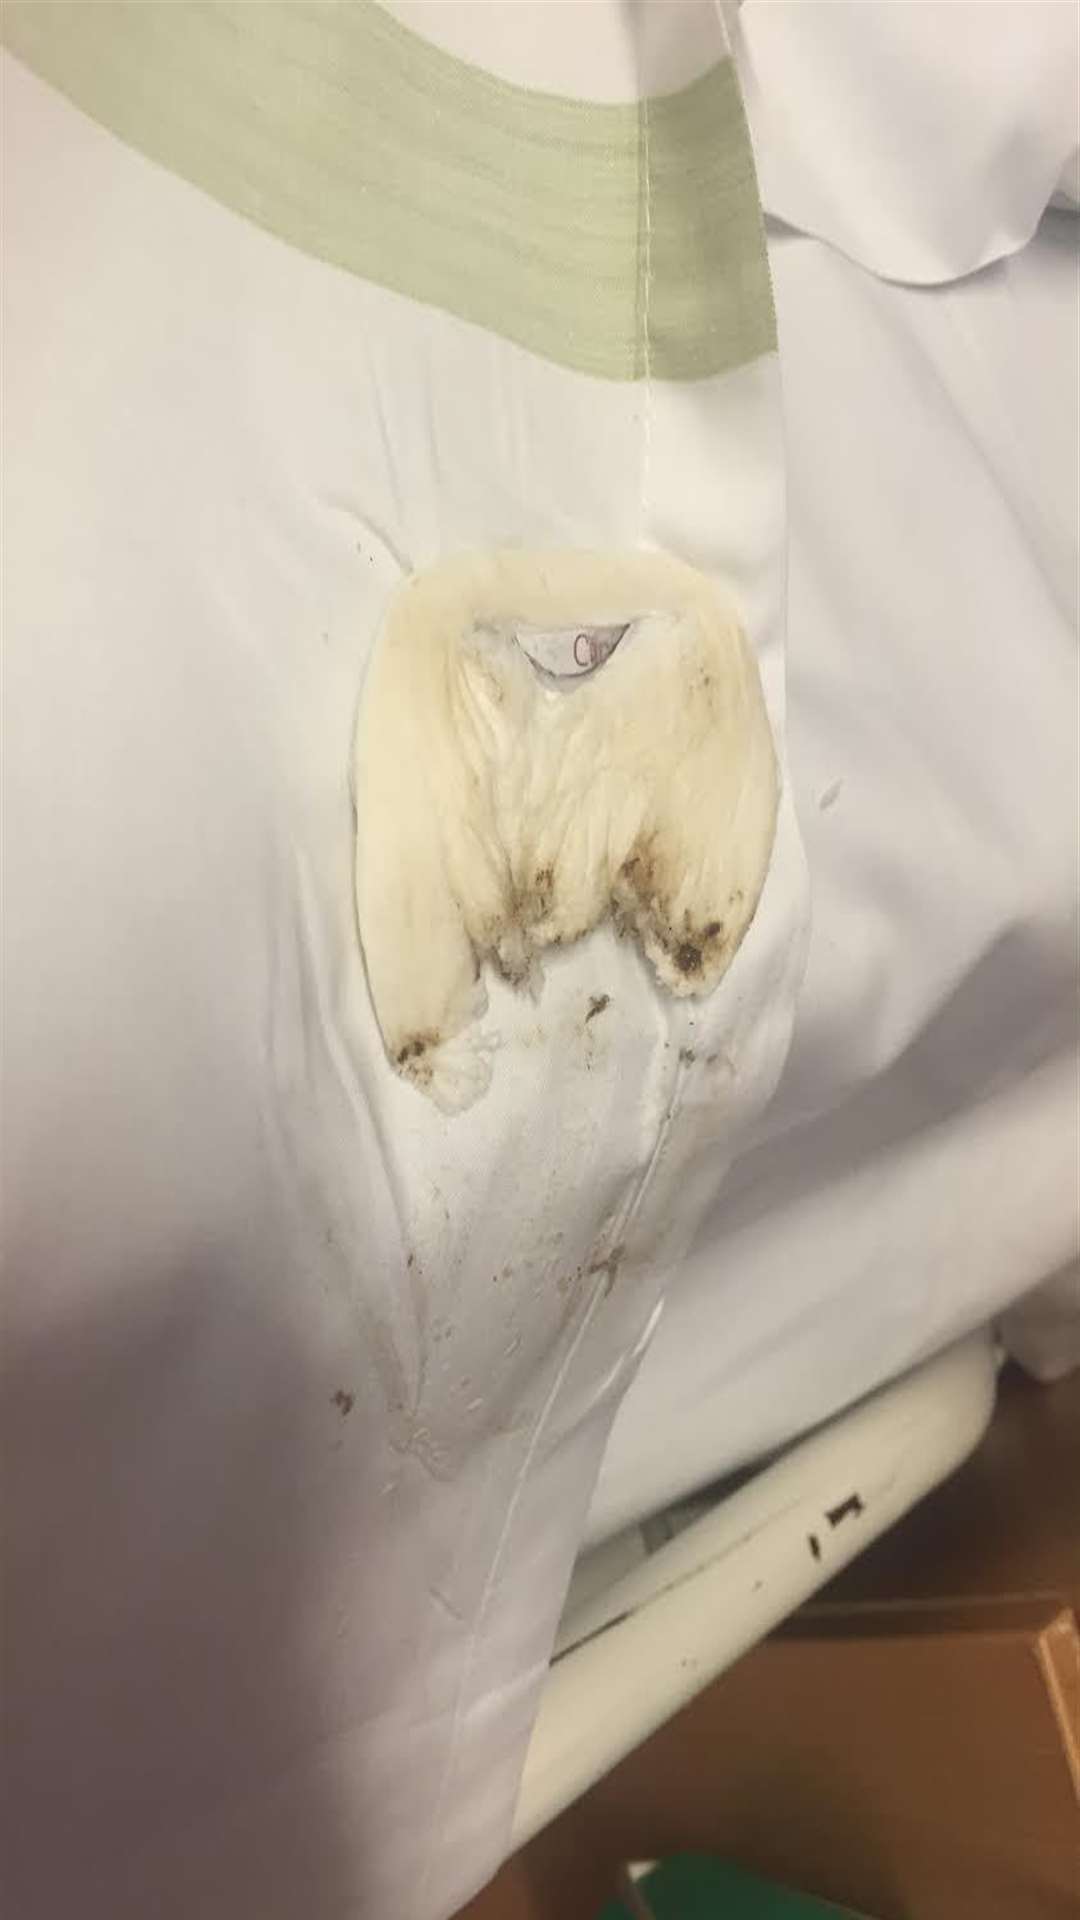 The used dressing Vicki found in her bed sheets